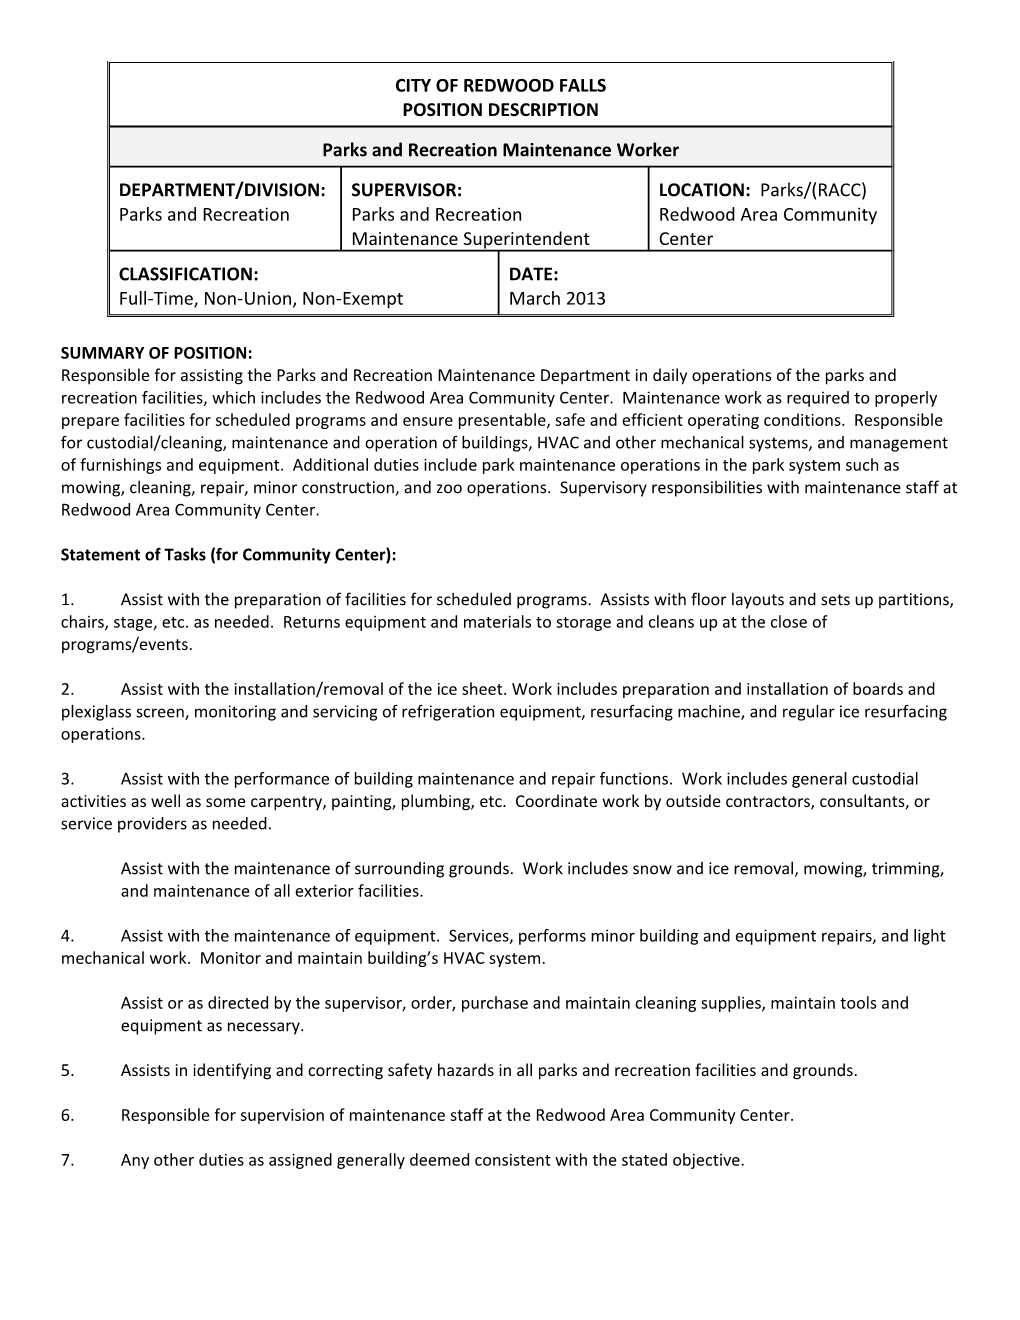 Parks and Recreation Maintenance Worker